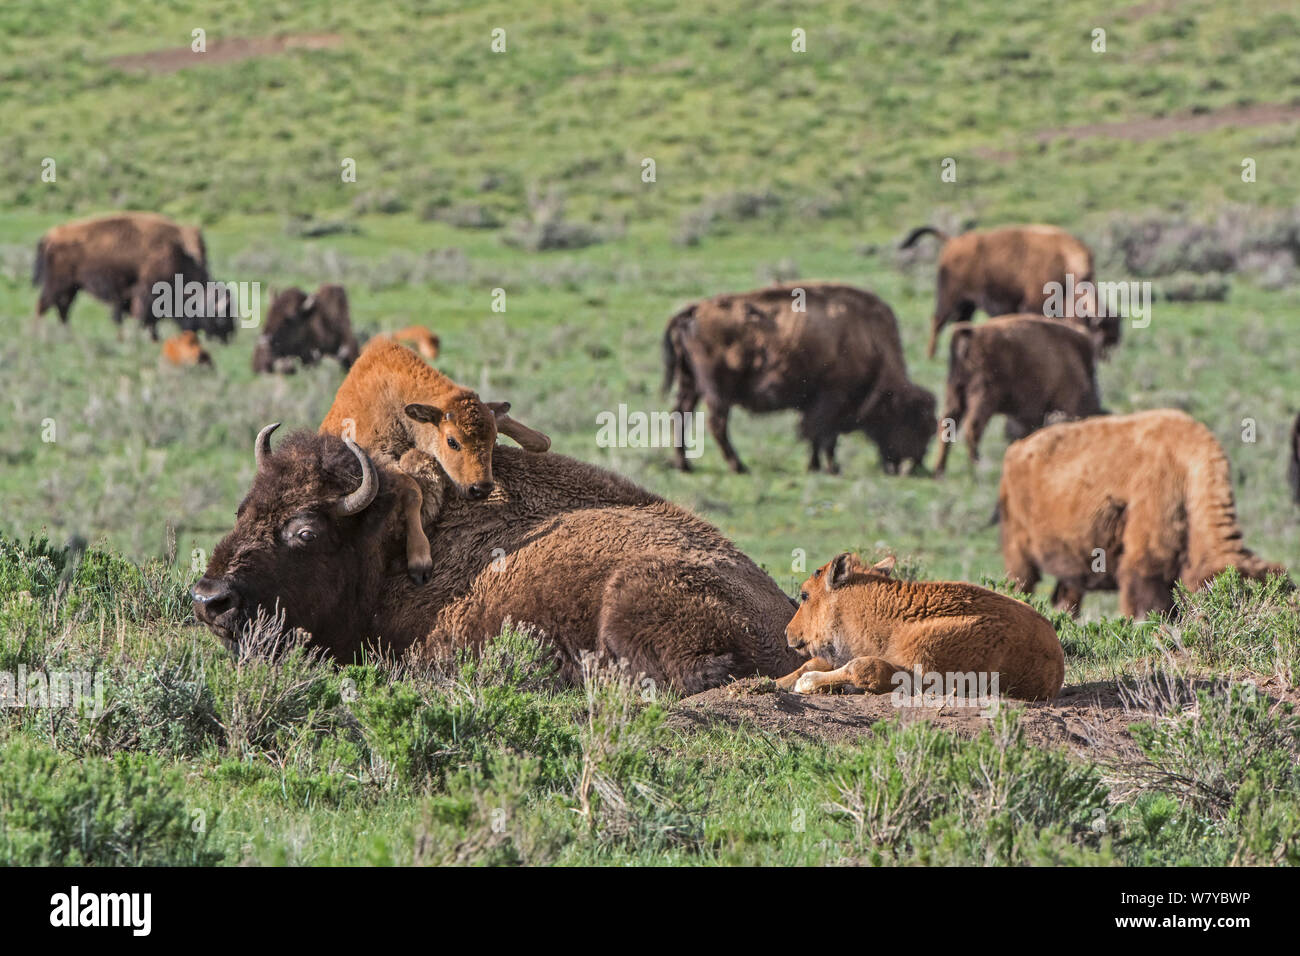 American Buffalo or Bison (Bison bison) calf trying to climb over mother, Yellowstone National Park, Wyoming, USA, May Stock Photo